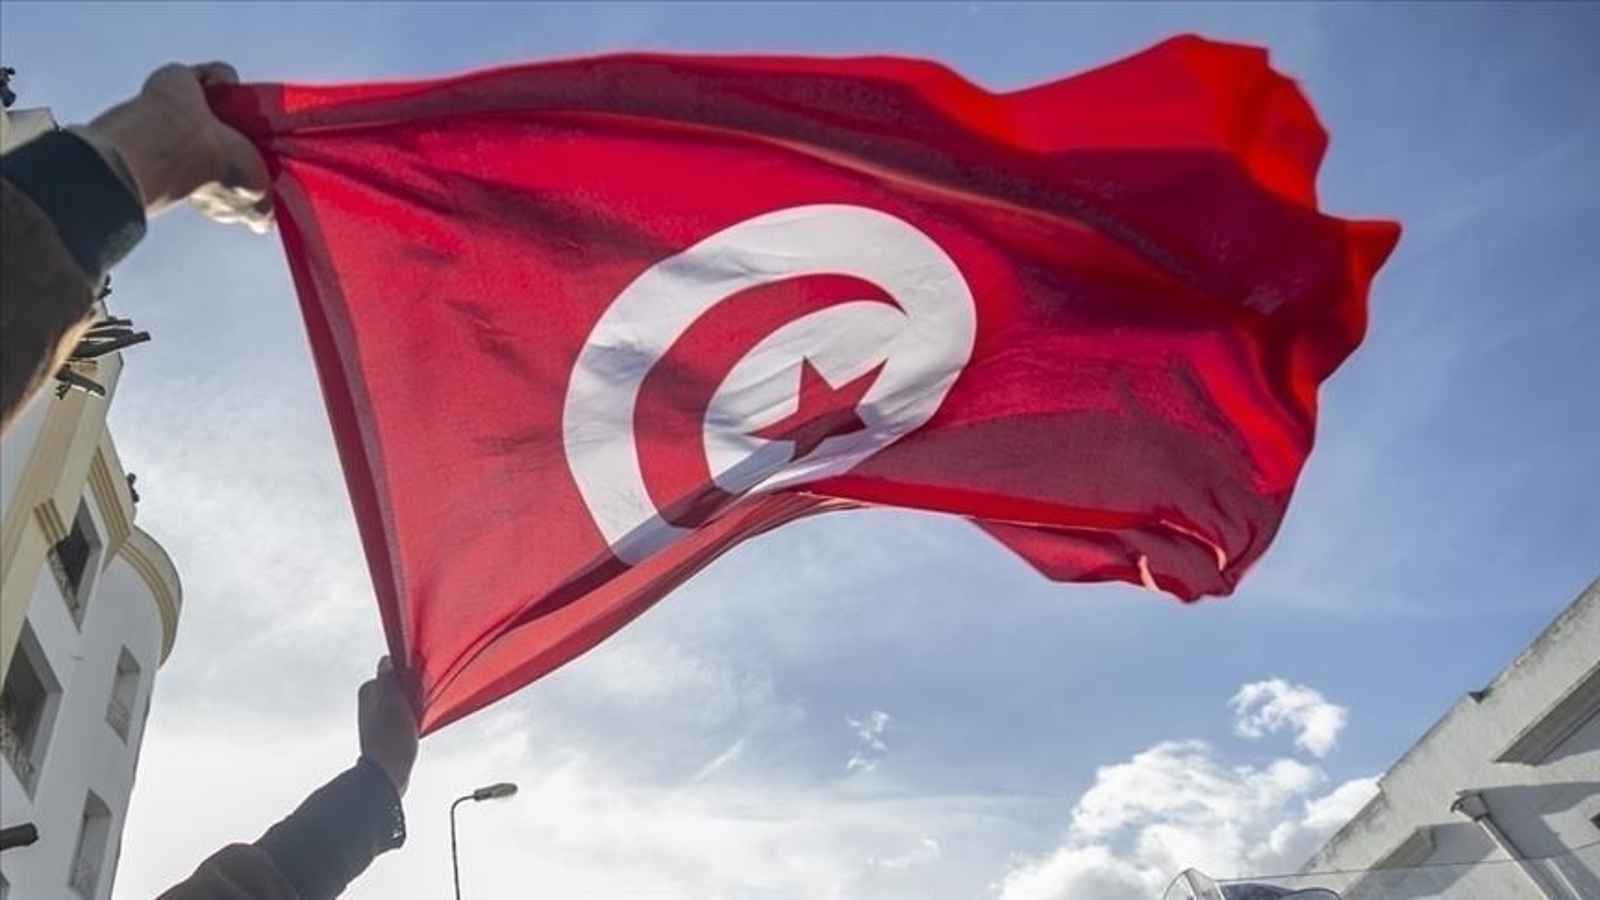 Tunisia: Evacuation Day 2023: Date, History, Facts about Tunisia